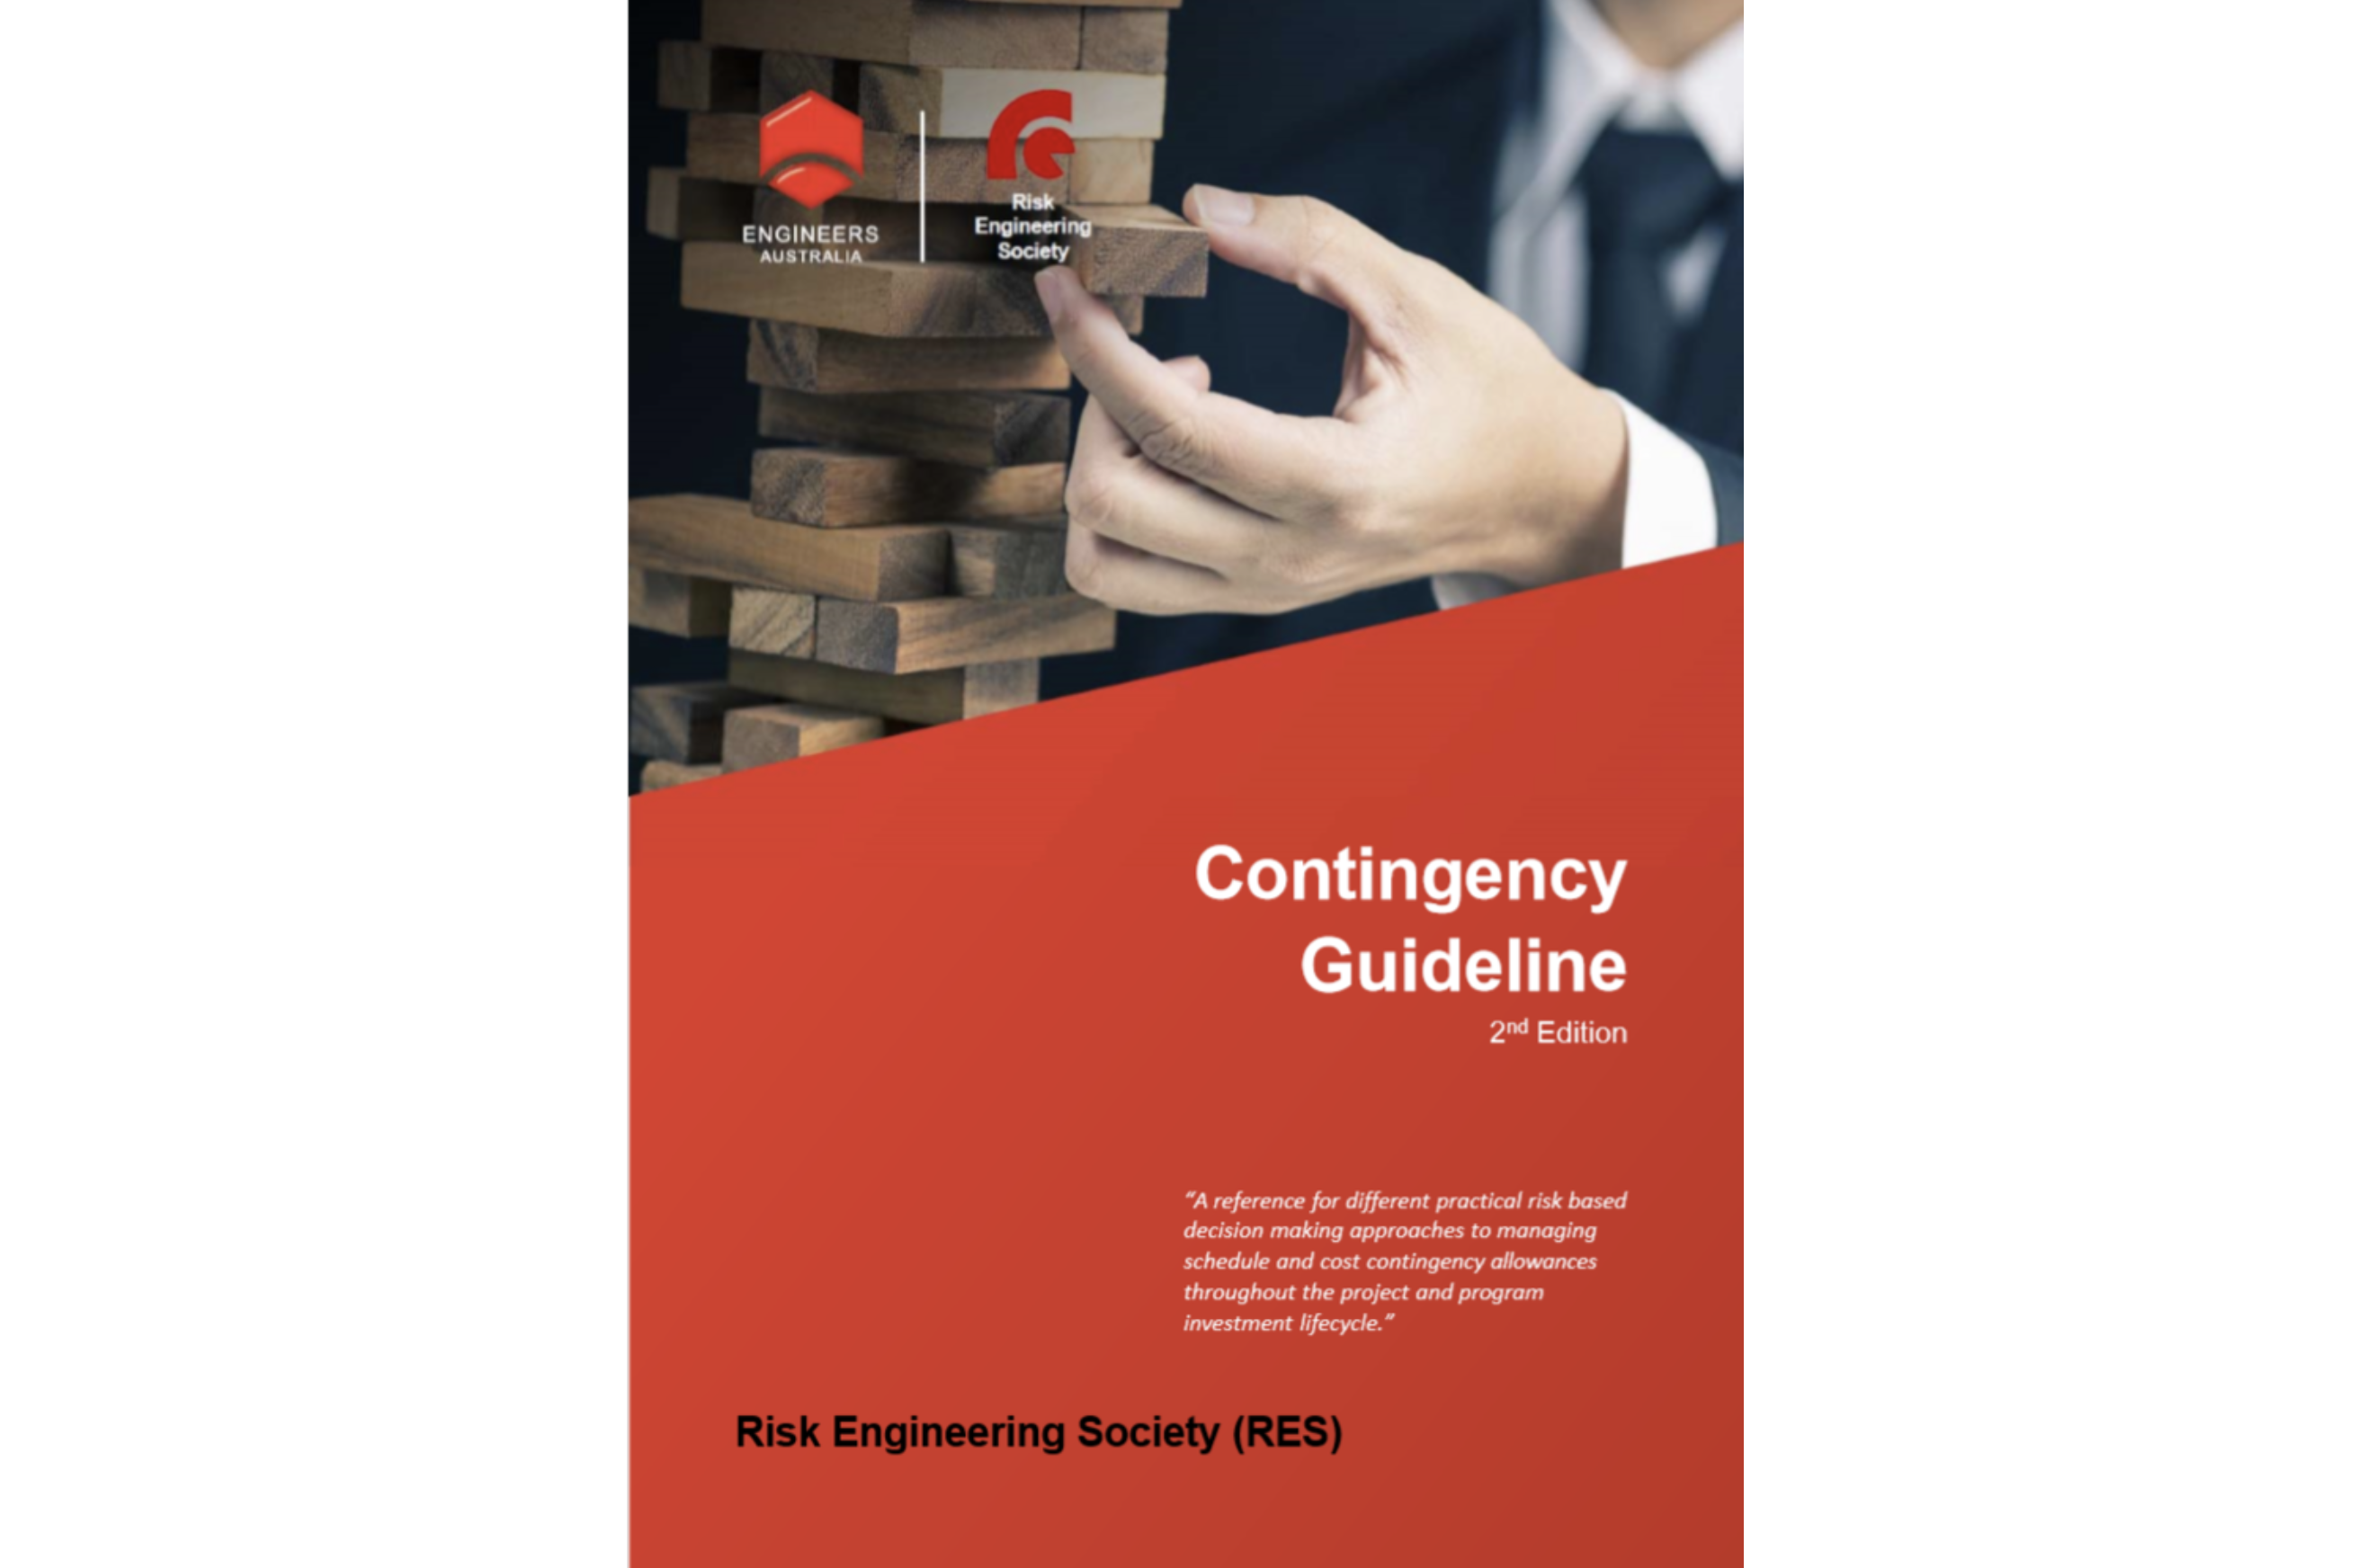 IRM endorsement of the Engineers Australia RES Contingency Guideline 2nd Ed